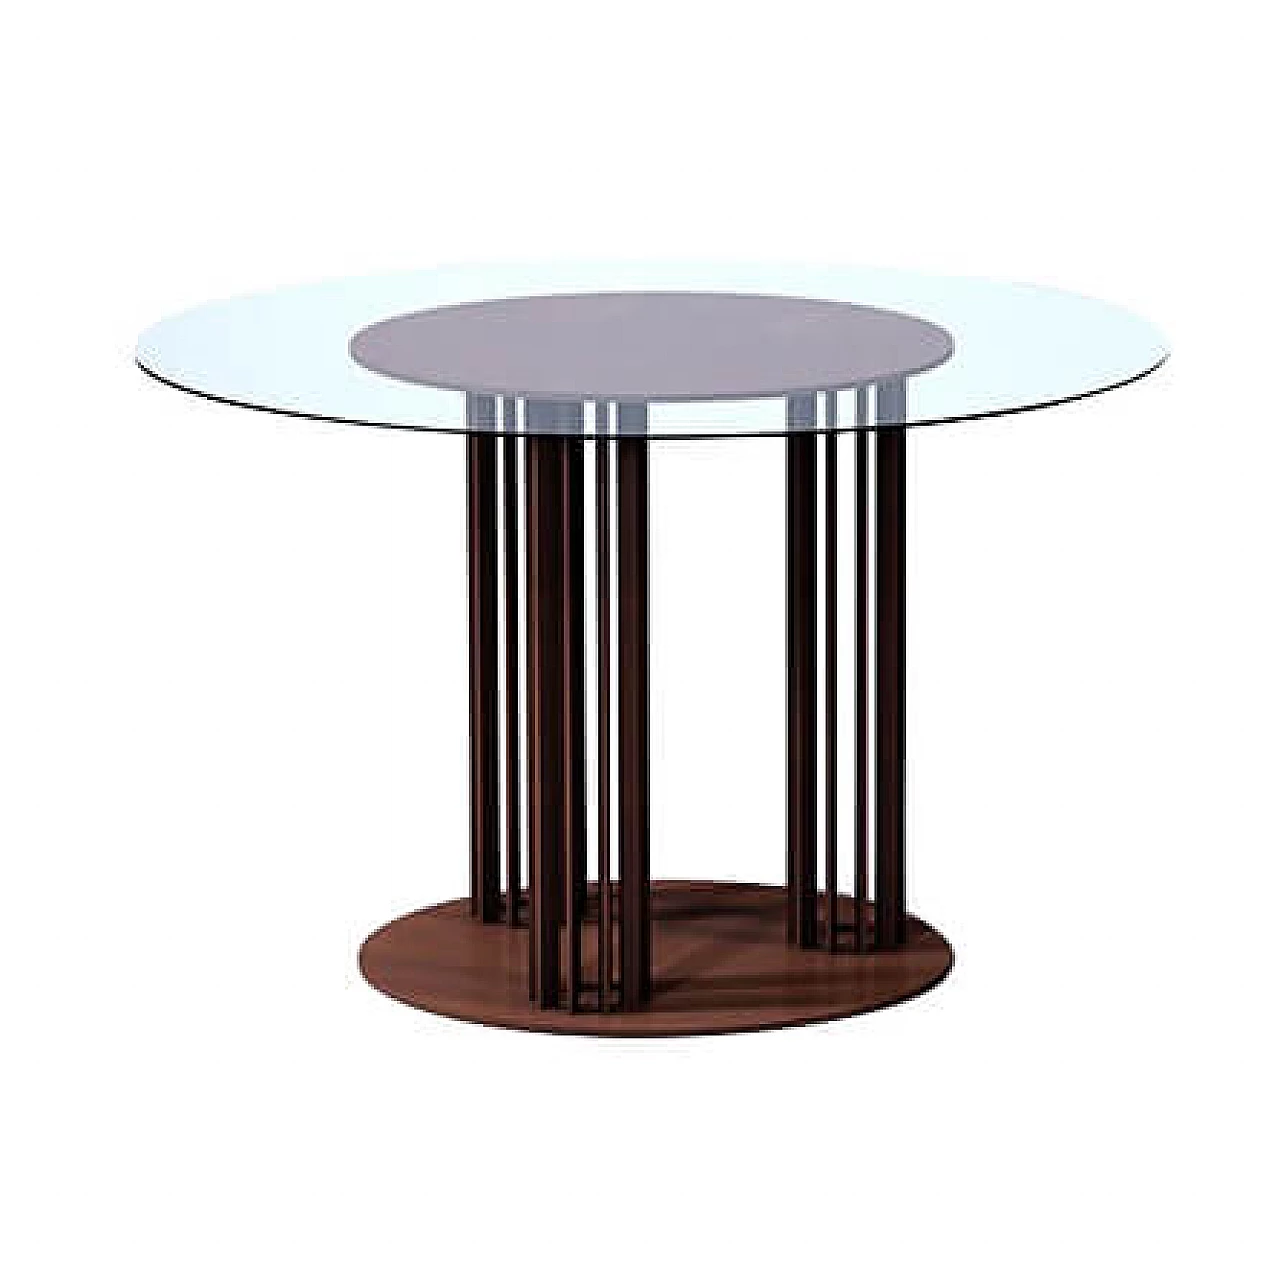 Table Kandisky 1923 in corten with glass top 1152988